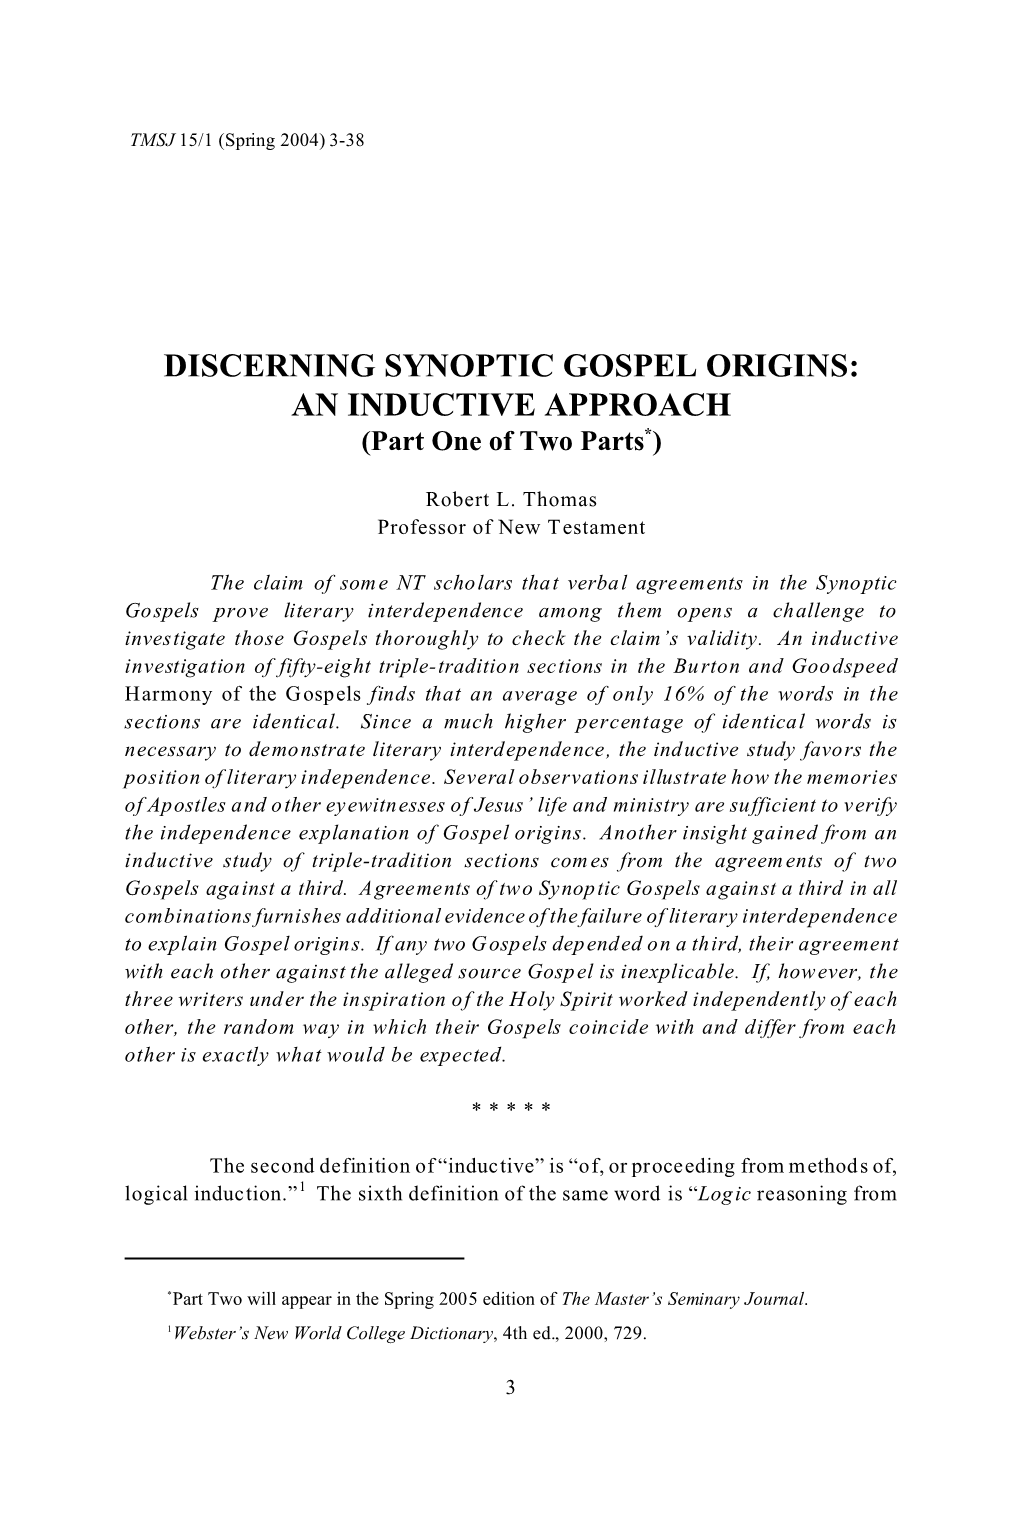 DISCERNING SYNOPTIC GOSPEL ORIGINS: an INDUCTIVE APPROACH (Part One of Two Parts*)